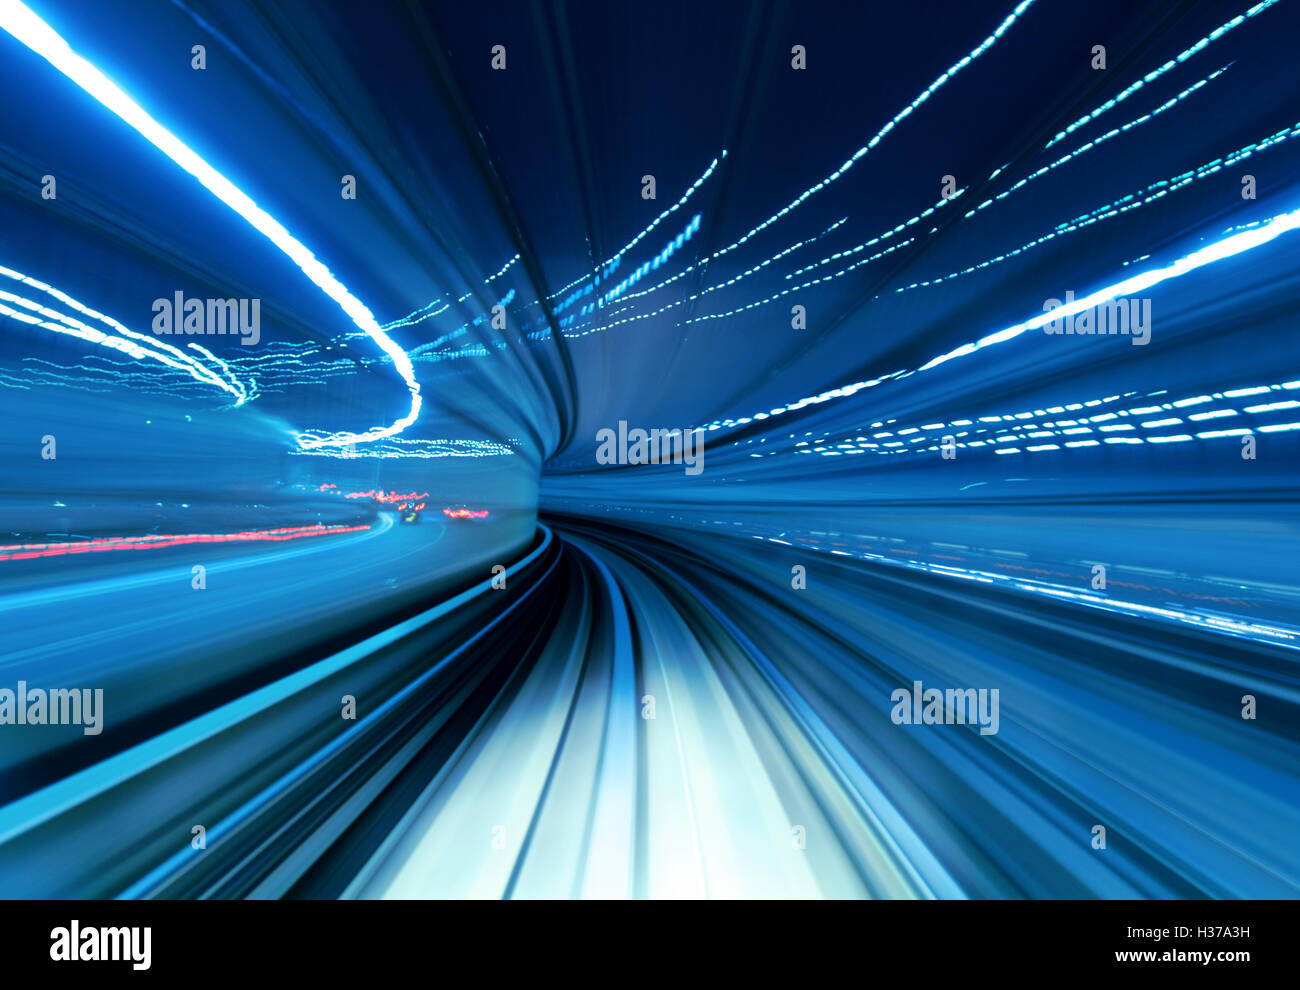 Train moving fast in tunnel Stock Photo - Alamy